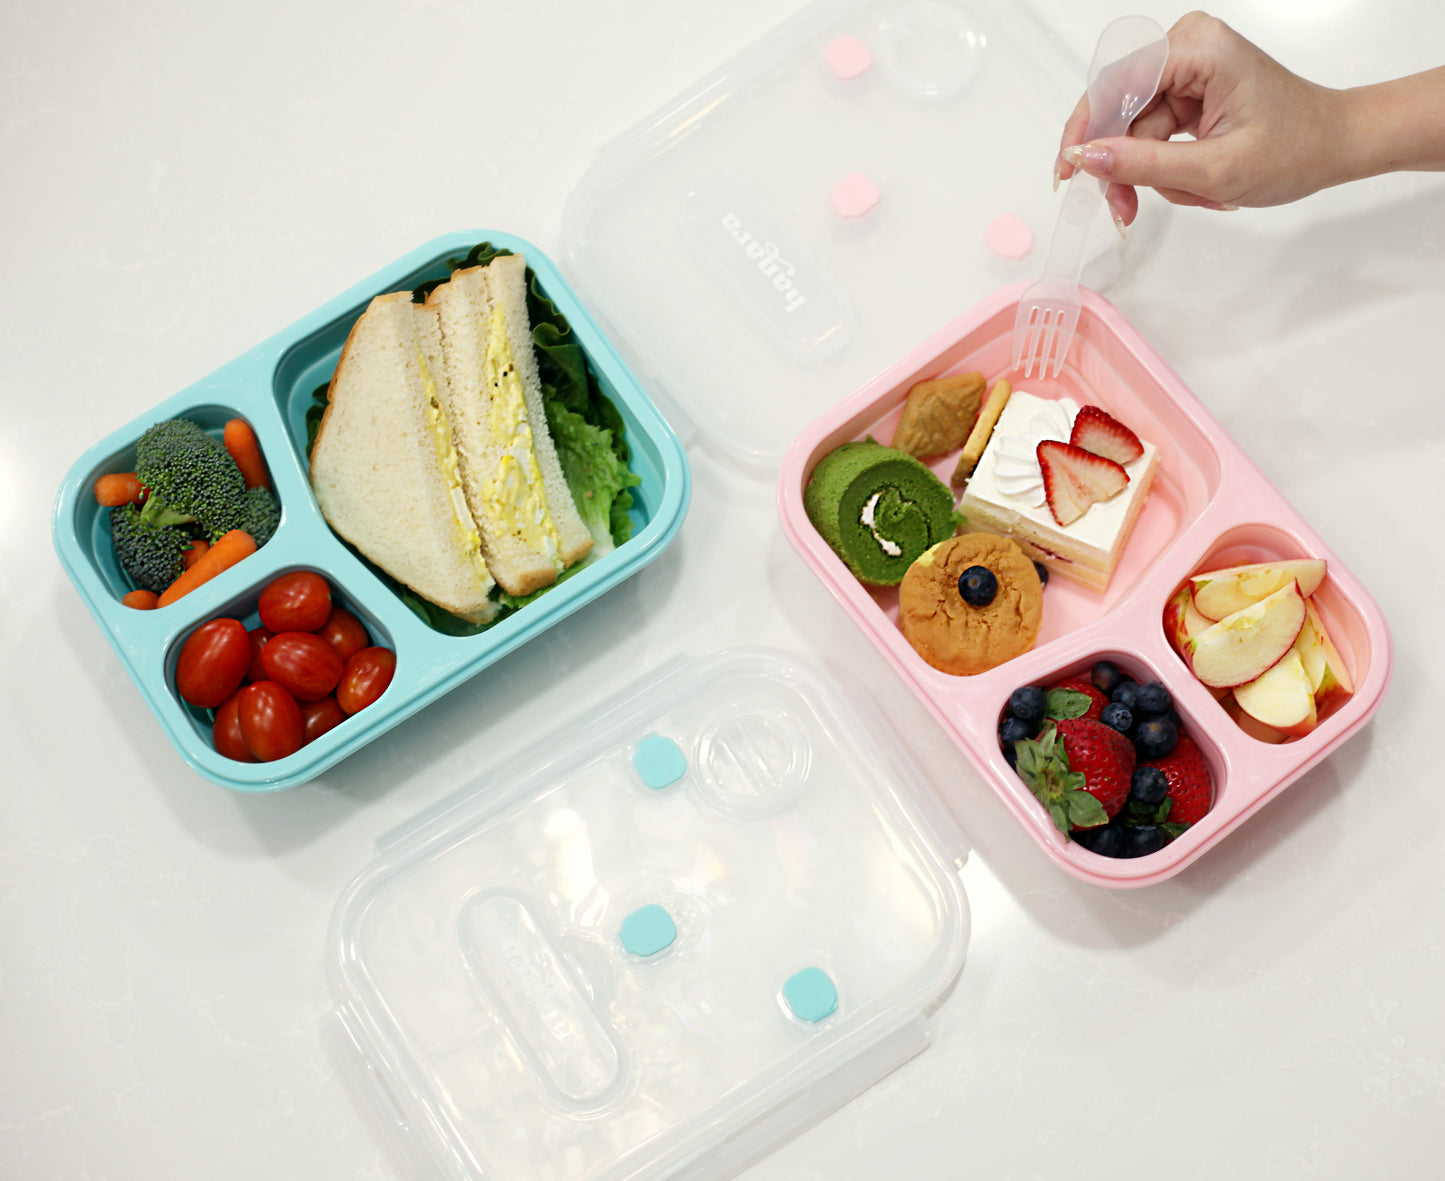 HANARA Collapsible Bento Lunch Box | Large Capacity, 3 Compartments, Sauce Container, Fork, Spoon | For Travel, Work, School, Out Door Activities | Bpa-Free, Microwave-Safe | PINK